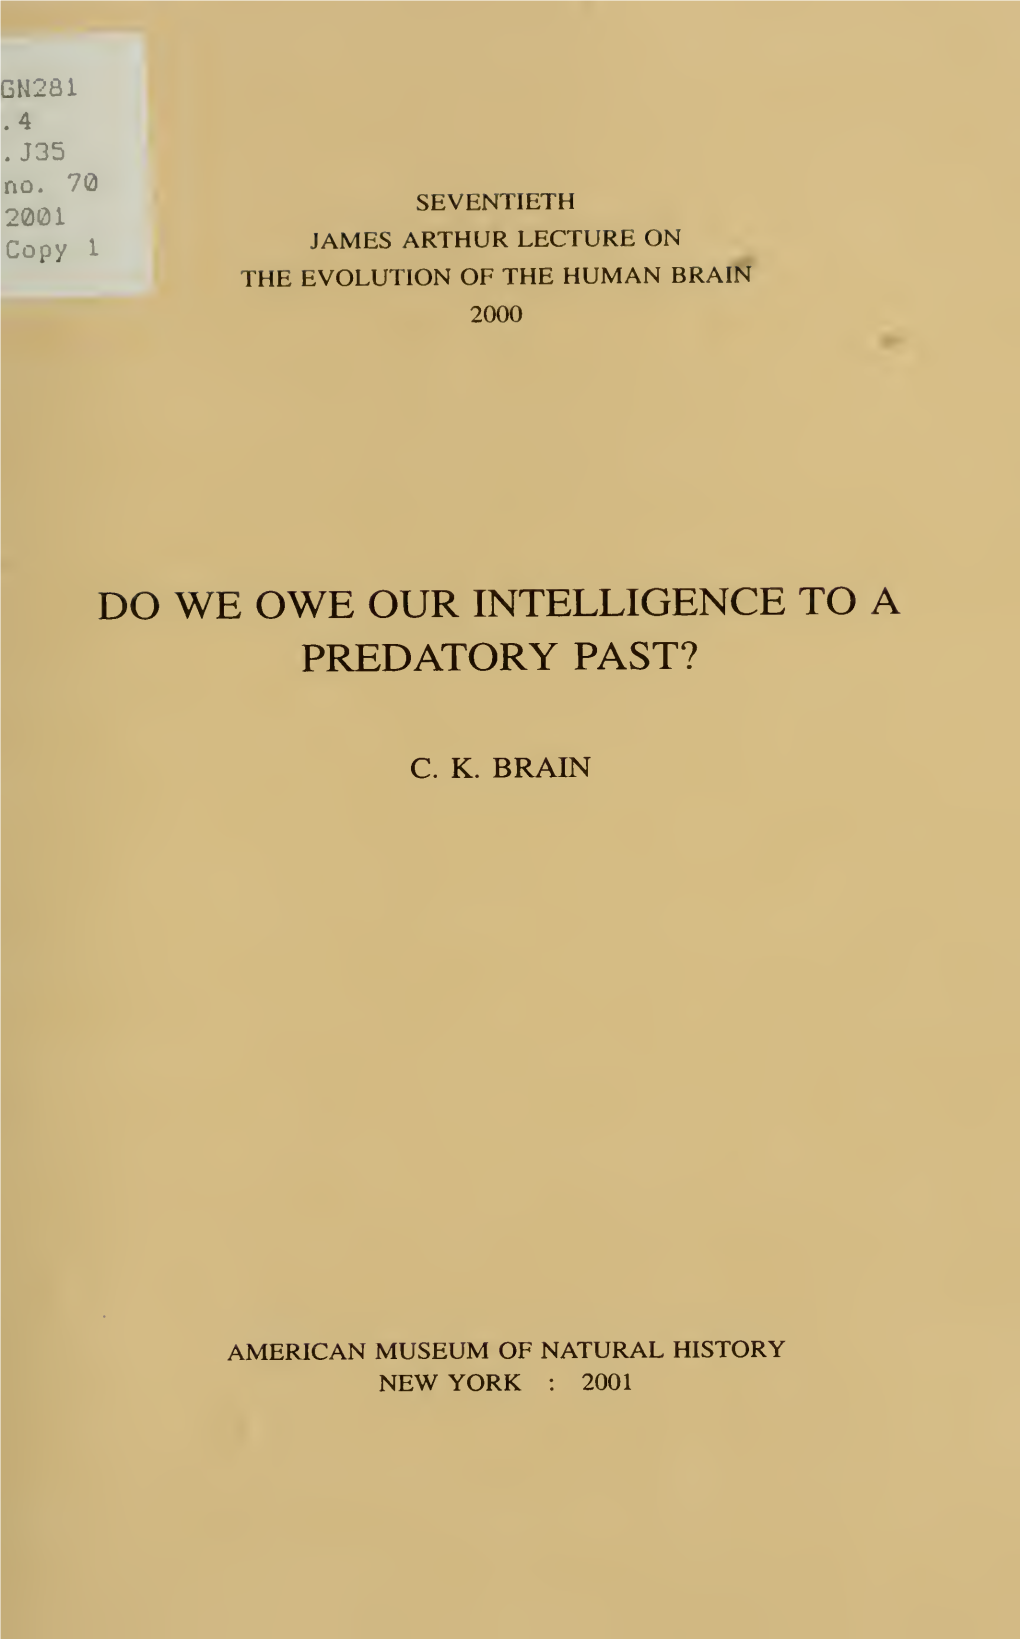 Do We Owe Our Intelligence to a Predatory Past?